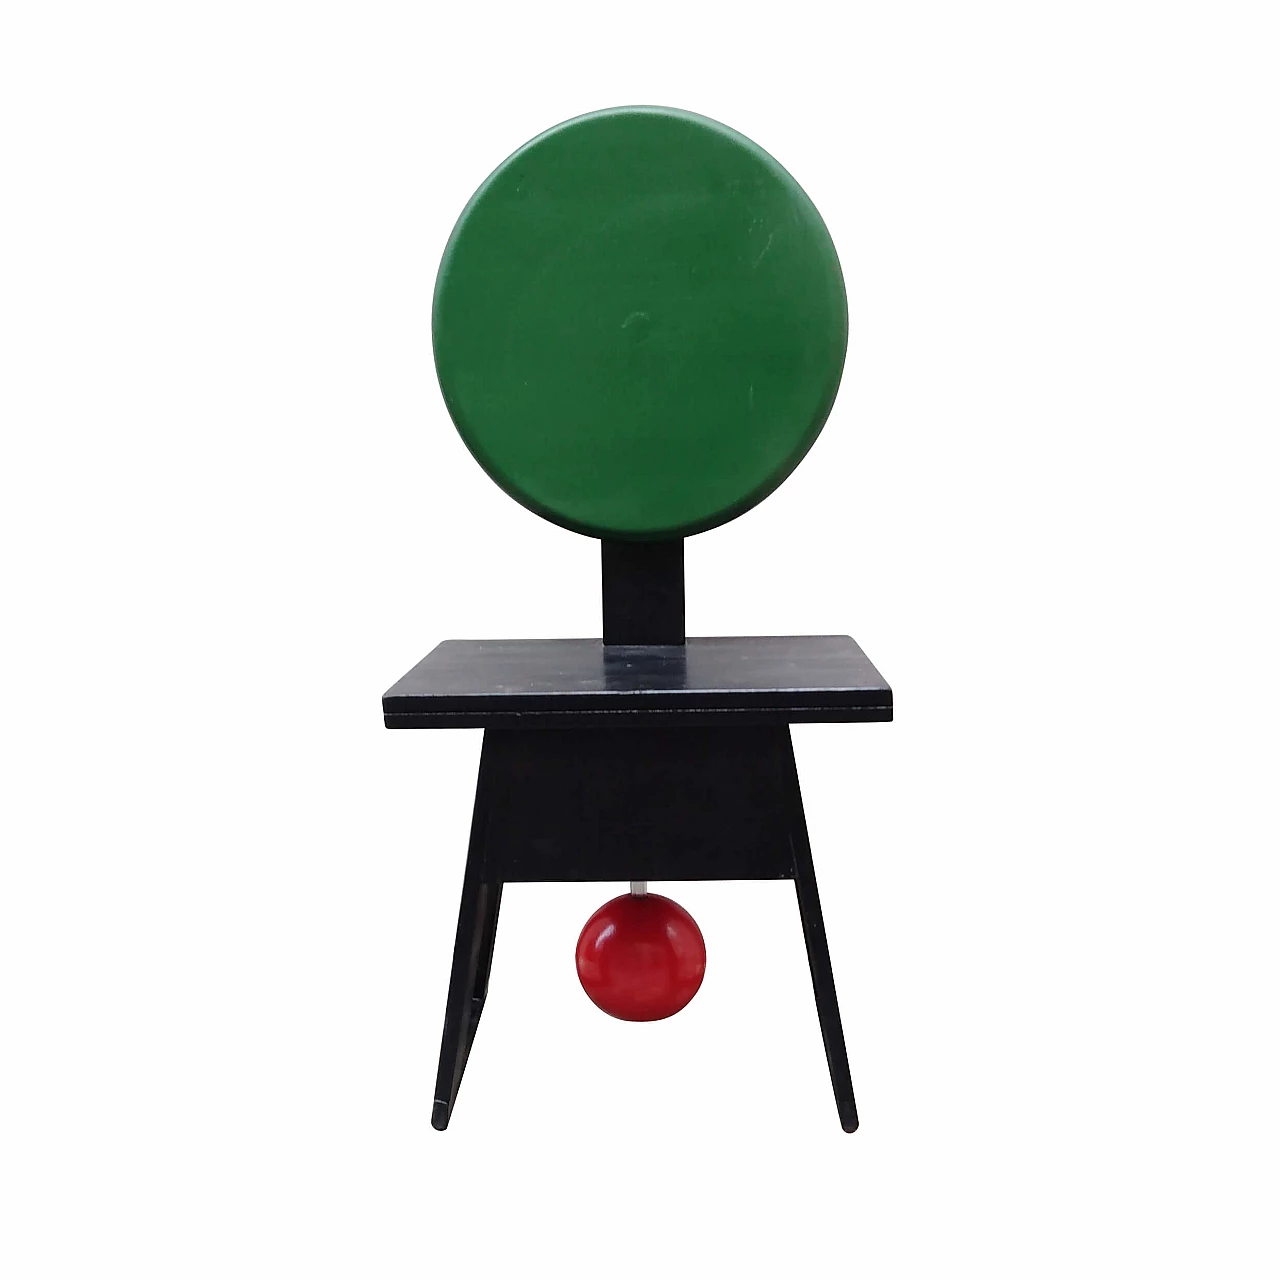 Chair with red ball 1127150